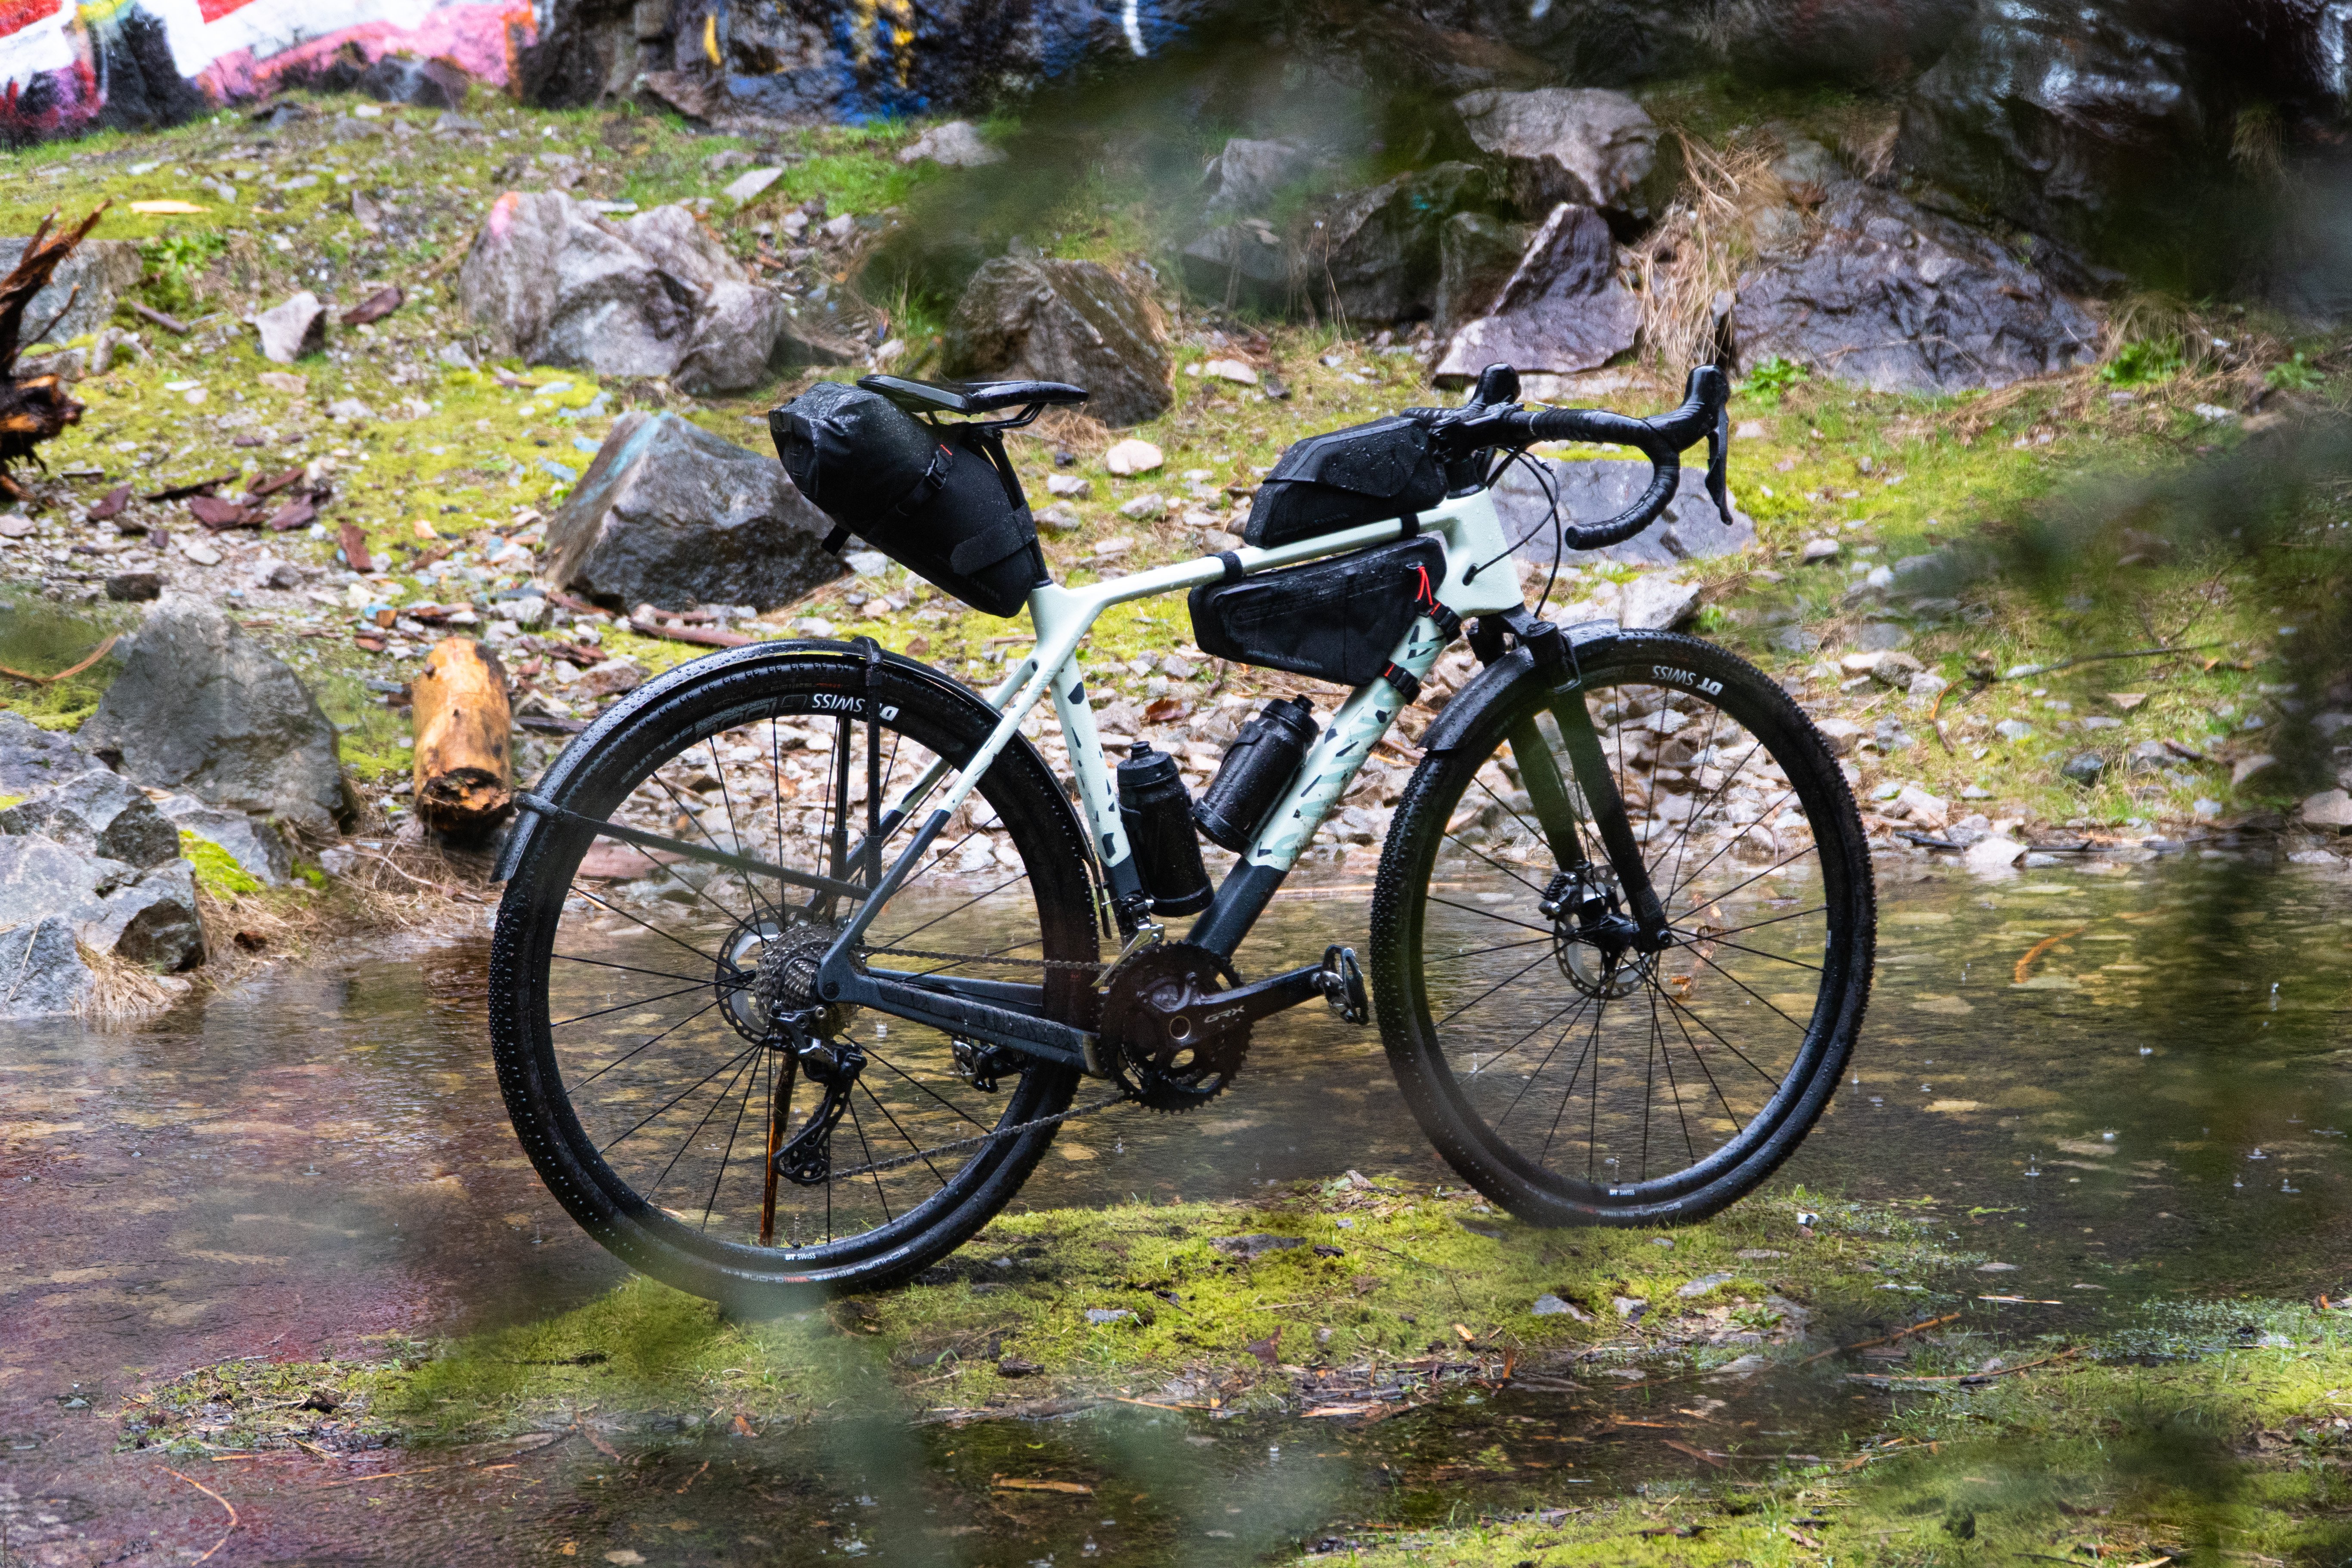 10. Recommendations for the best bike for bikepacking: Canyon Grizl CF CL 8.